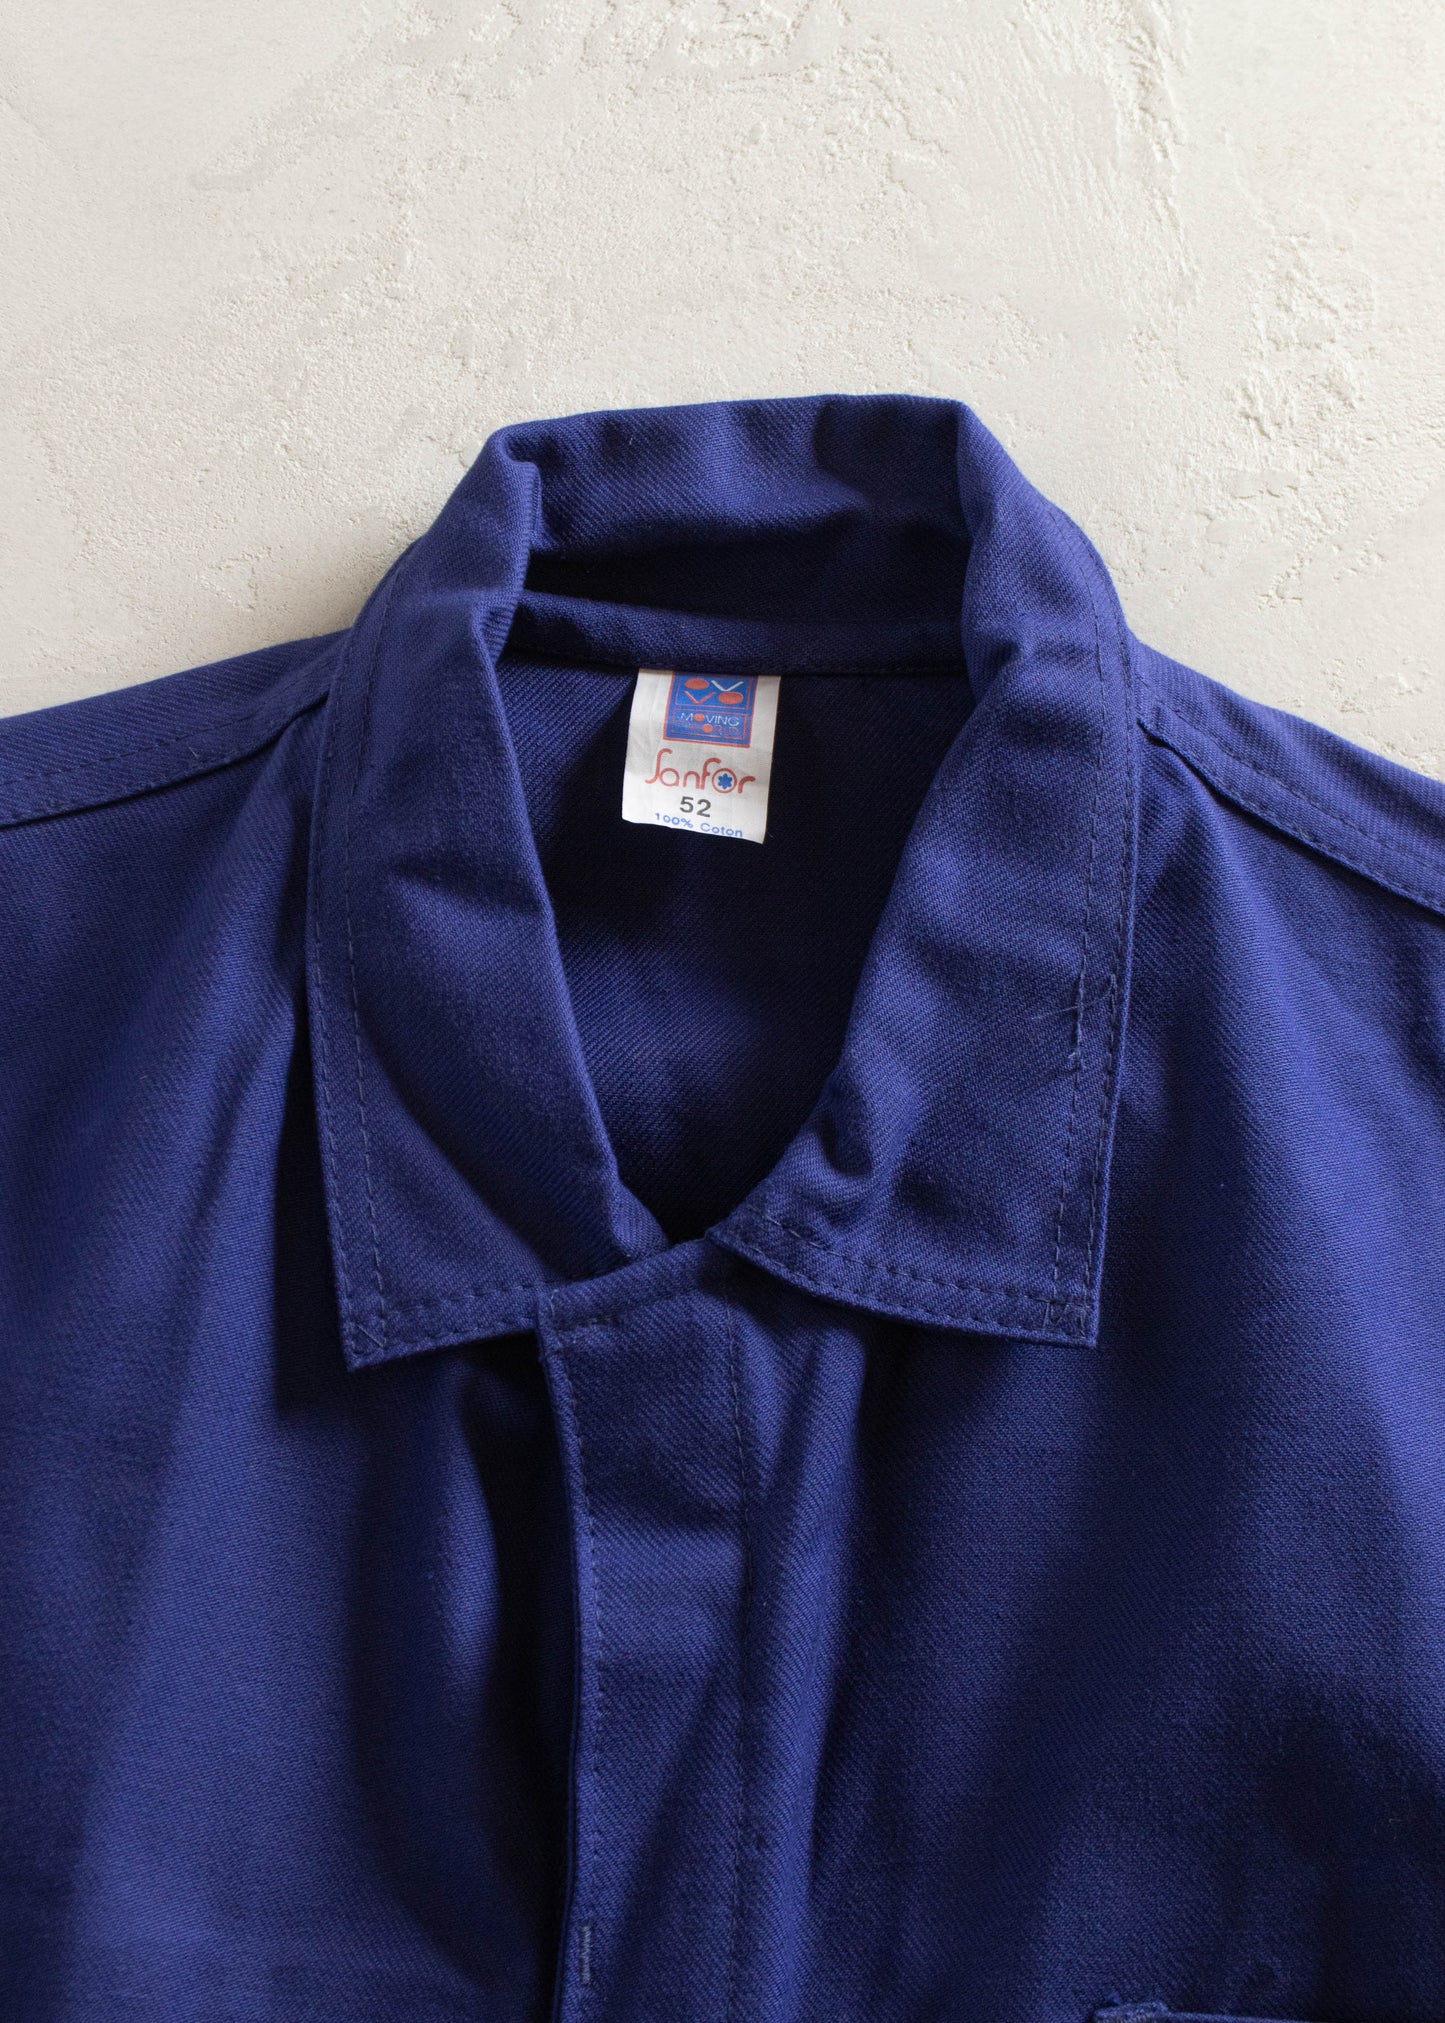 1970s Deadstock French Workwear Chore Jacket Size L/XL